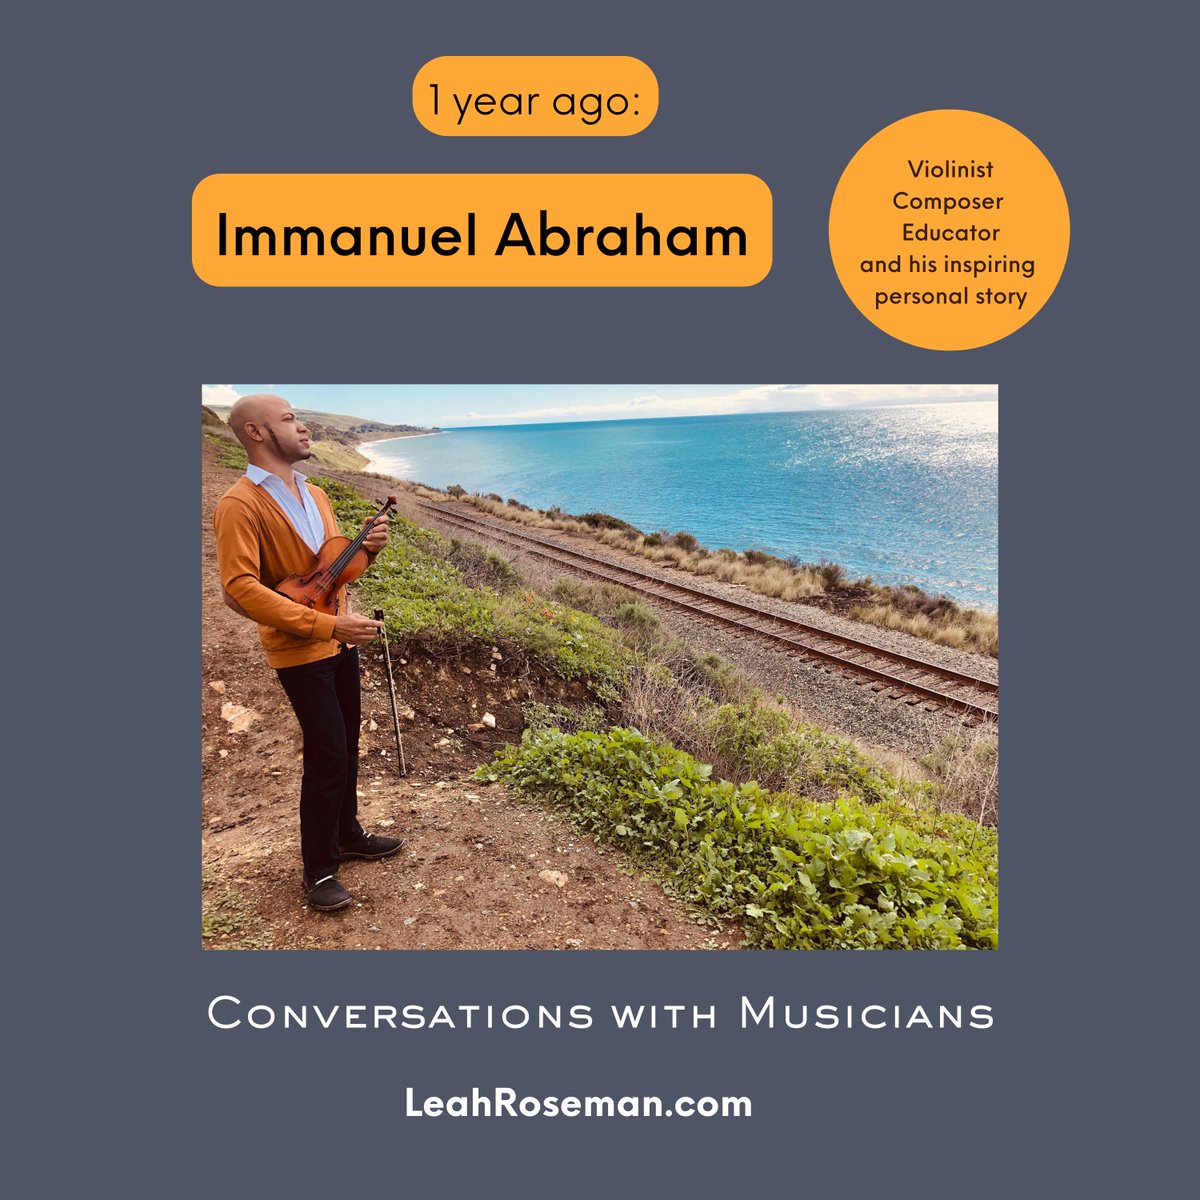 1 year ago…with Immanuel Abraham: Violinist, Composer, Educator, and his inspiring personal story leahroseman.com/episodes/imman… His phenomenal talent, discipline and creativity  is even more inspiring since he didn’t have an opportunity to learn a musical instrument until the age of